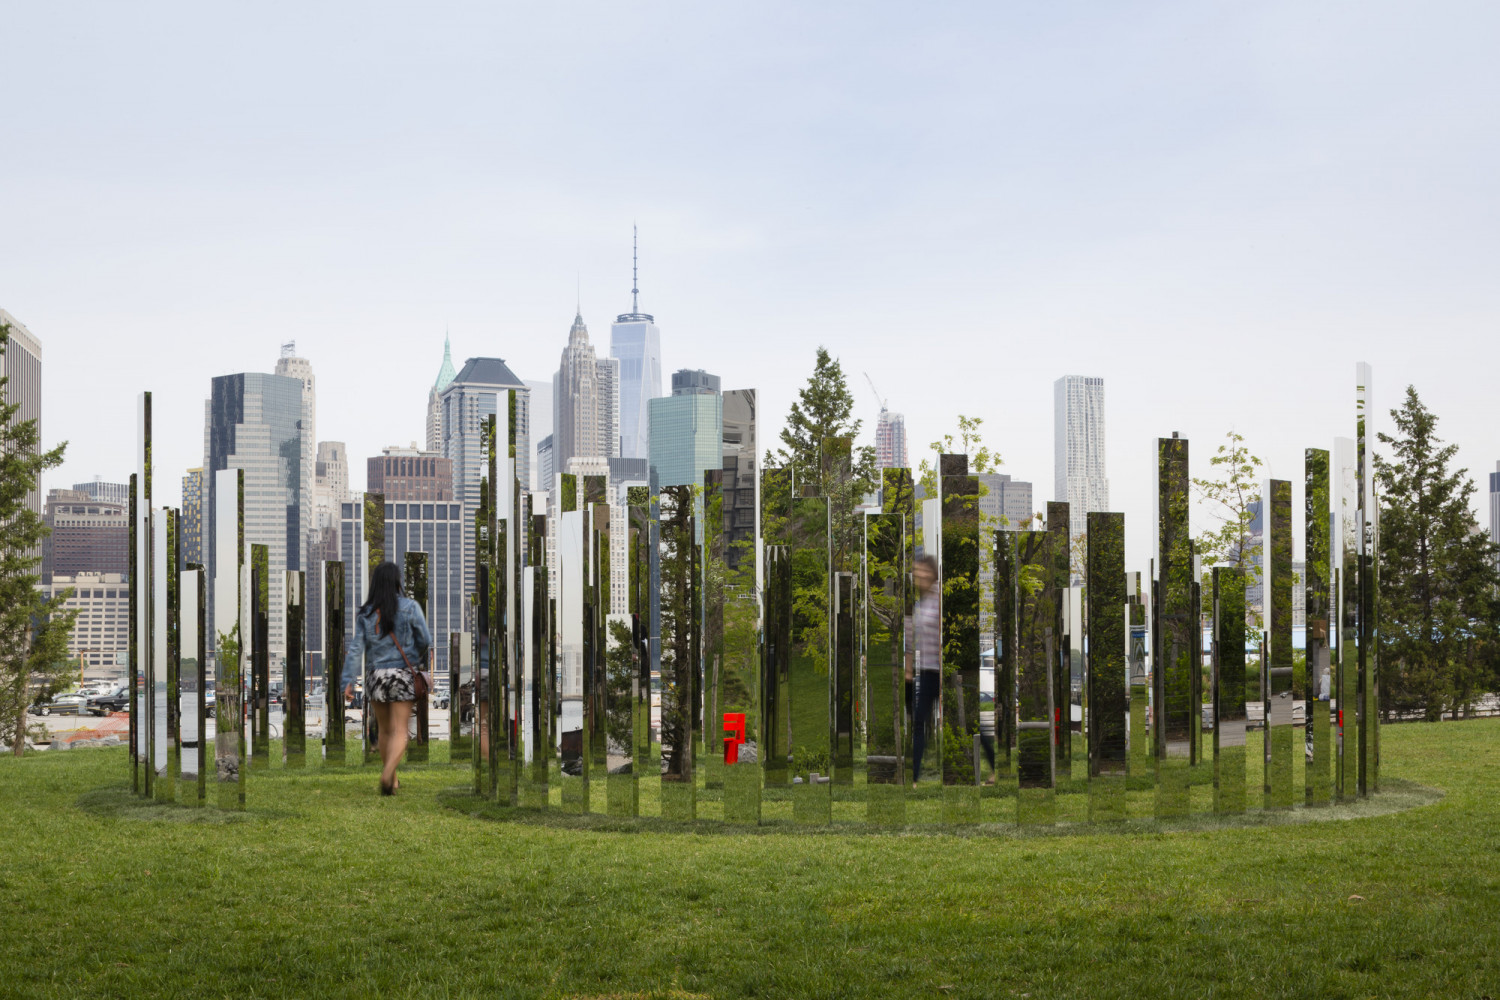 Jeppe Hein, Mirror Labyrinth NY, part of the Exhibition 'Please Touch the Art'. Image: James Ewing courtesy of Public Art Fund